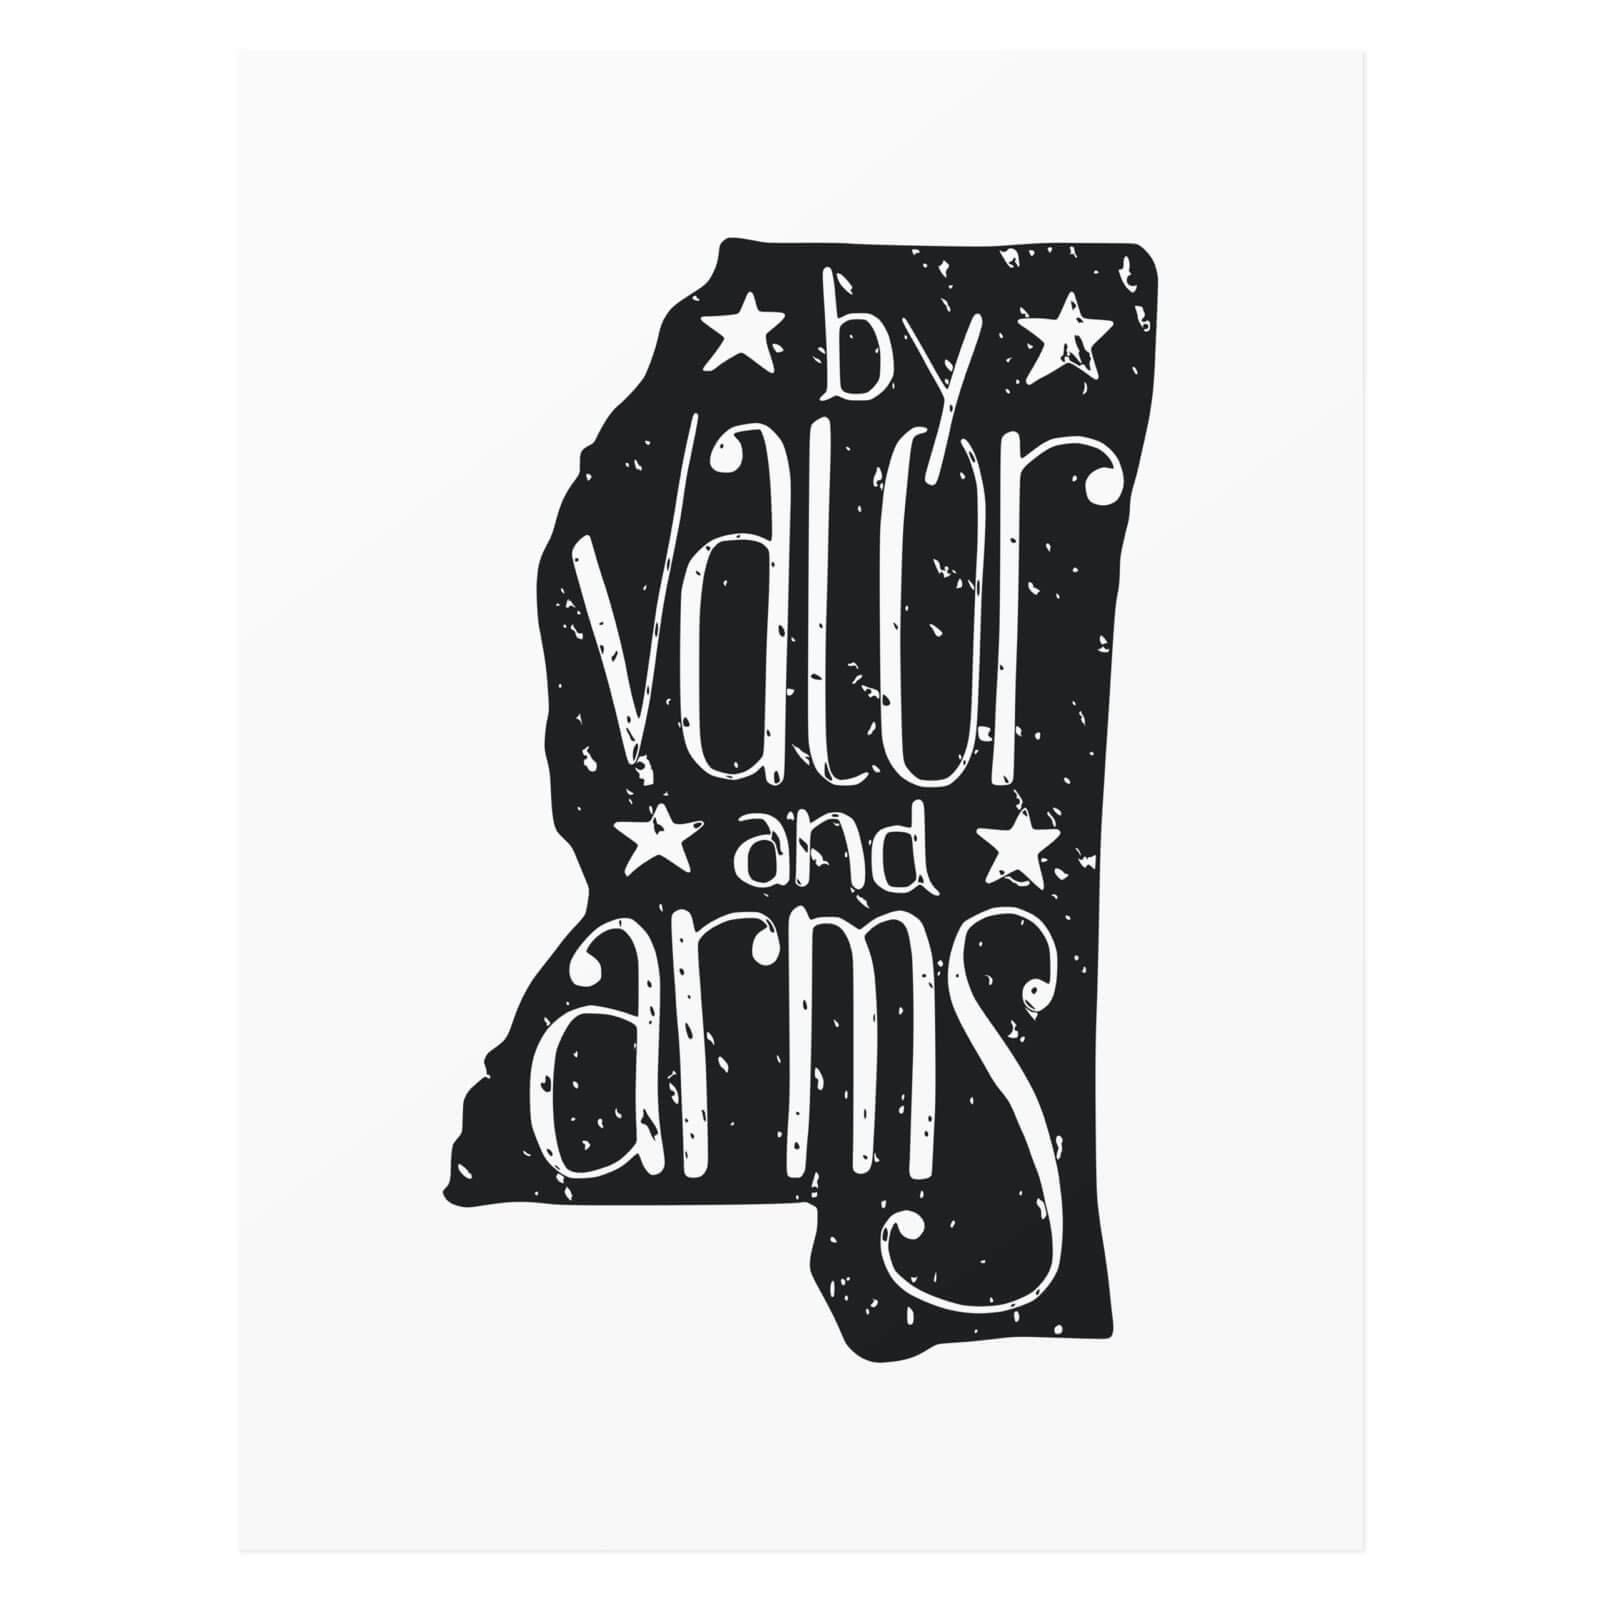 Mississippi — By valor and arms